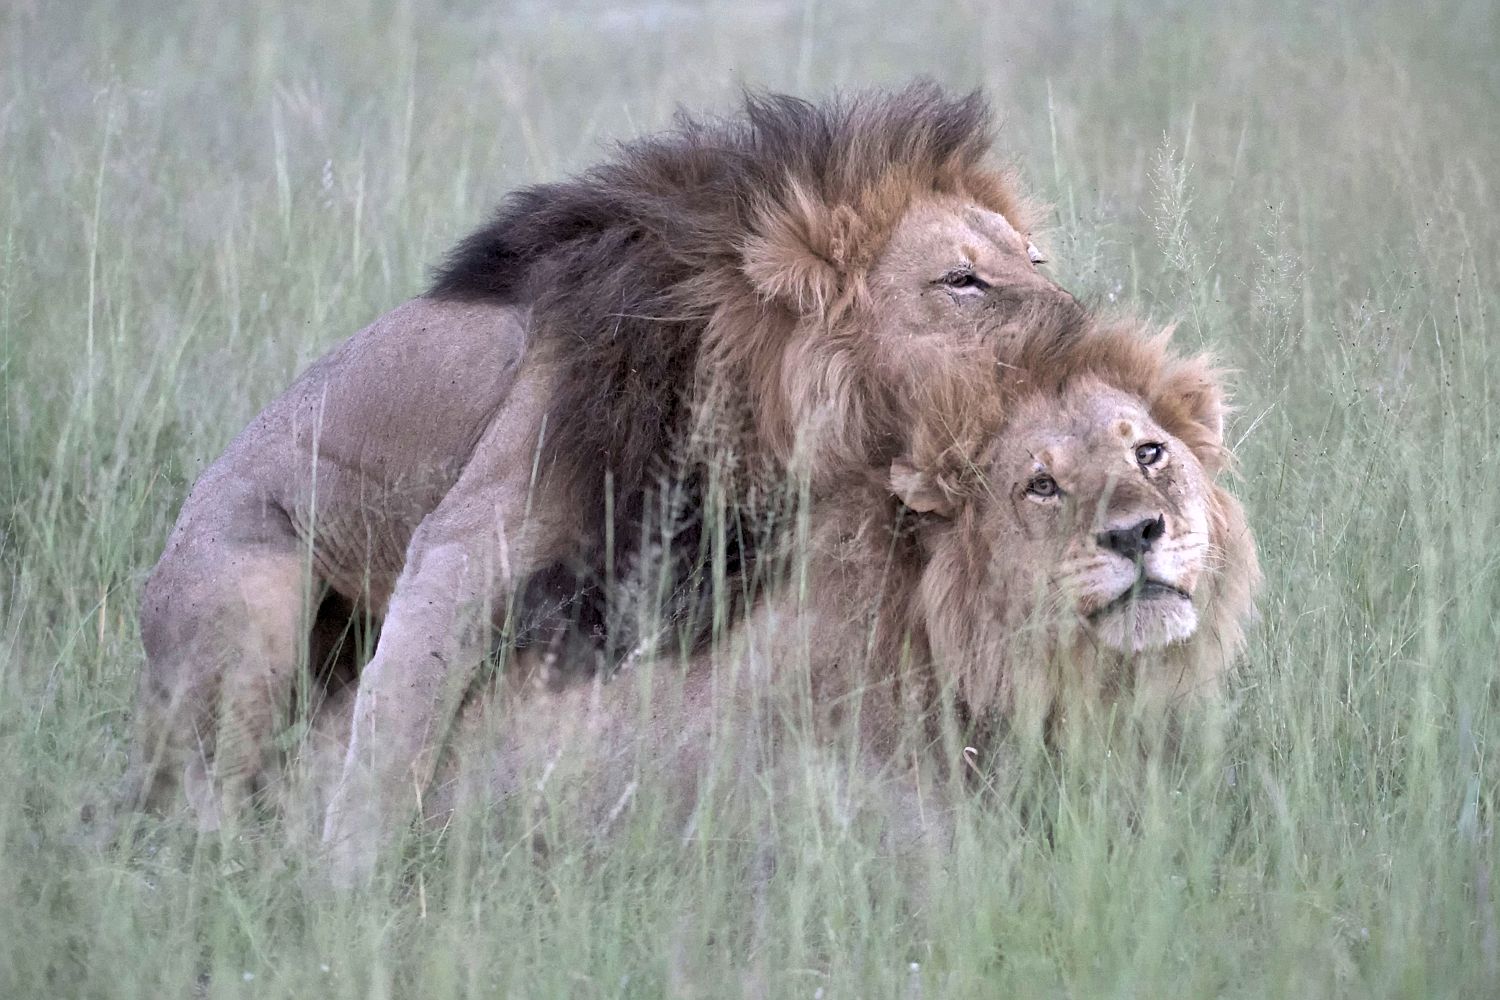 Is this a picture of gay lions mating